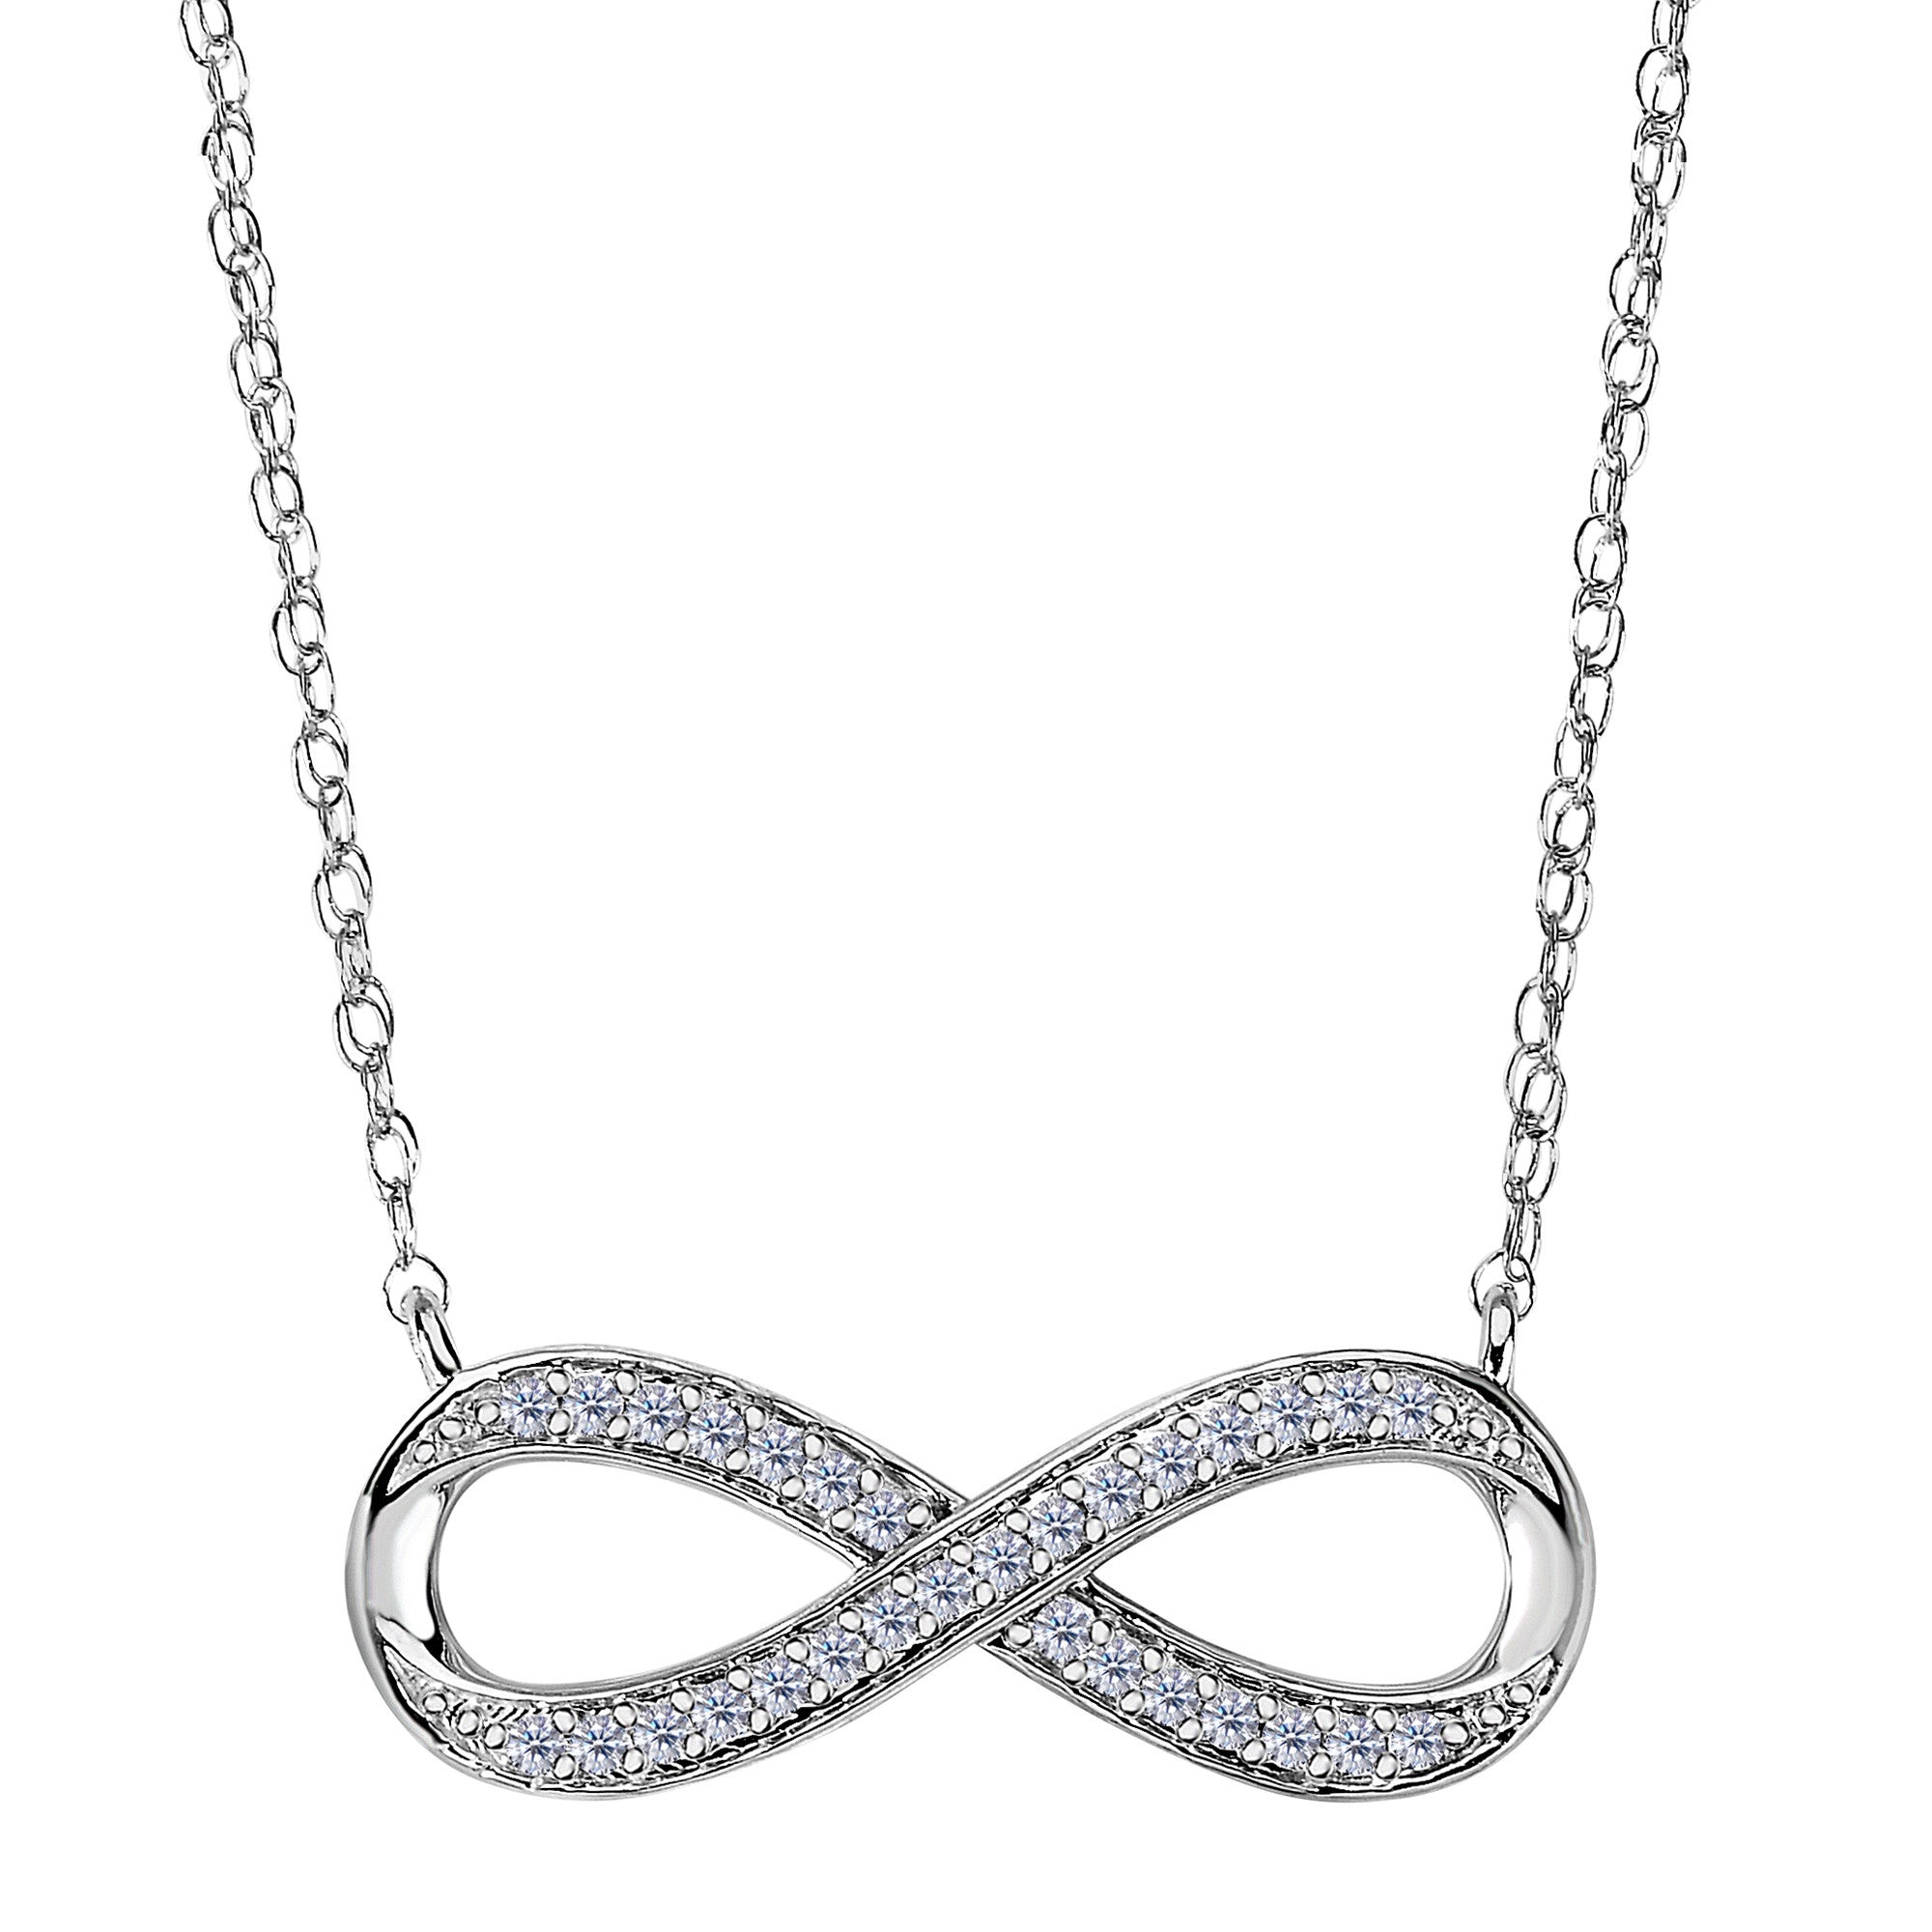 14K White Gold With 0.10 Ct Diamonds Infinity Necklace - 18 Inches fine designer jewelry for men and women